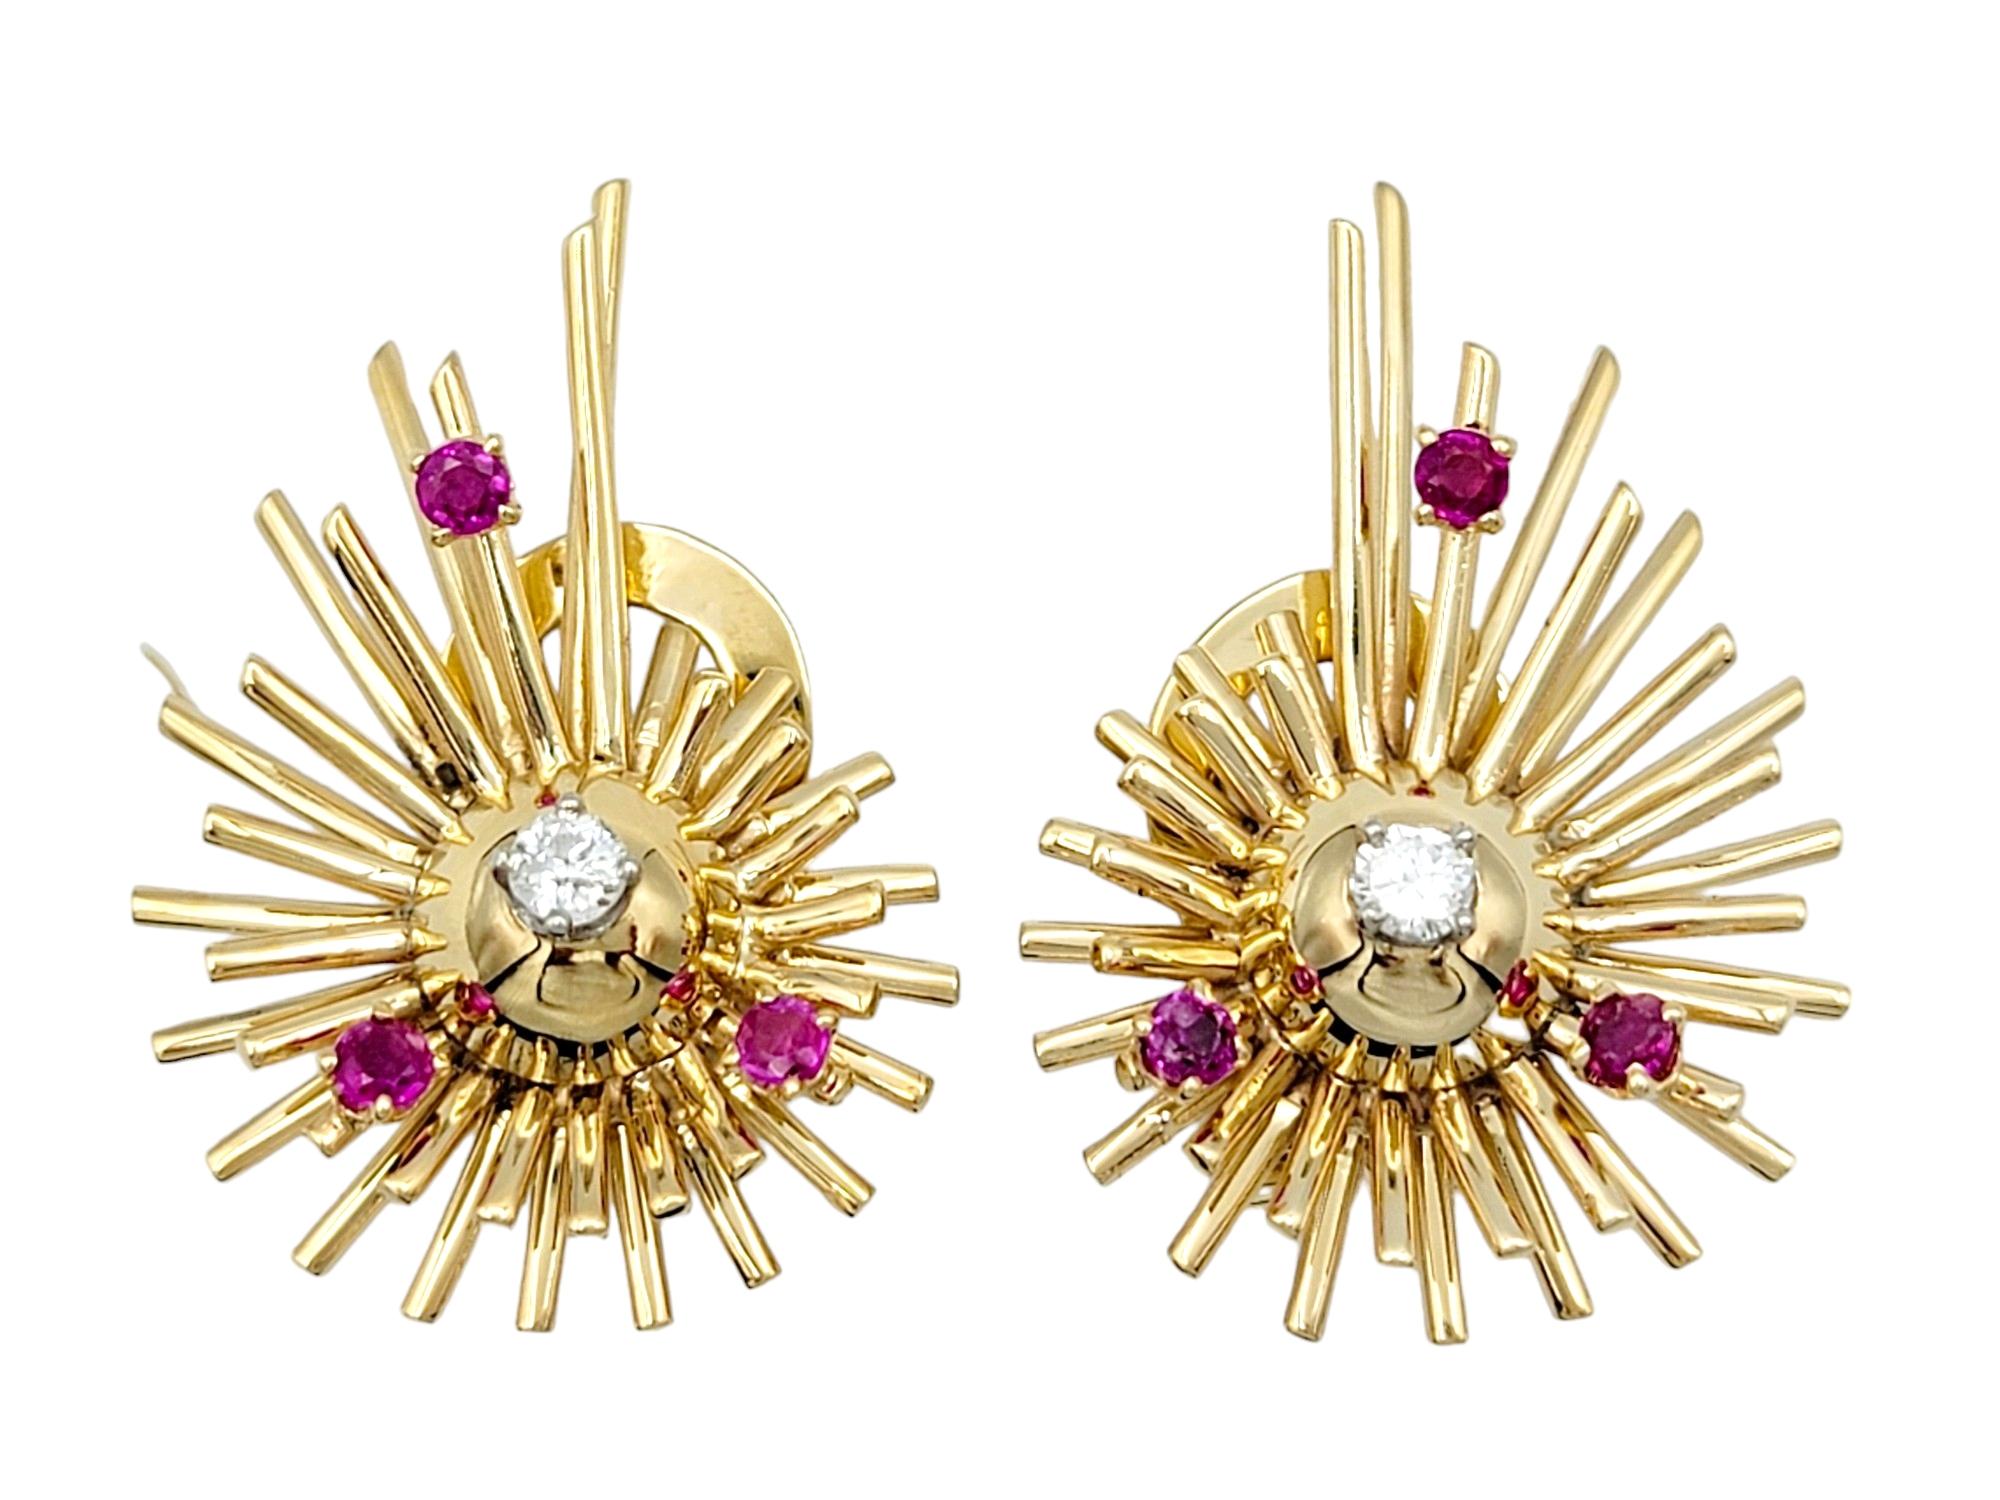  Introducing a stunning pair of vintage Sputnik-style clip-on earrings, exuding timeless elegance in 14k yellow gold. These exquisite earrings capture the essence of the iconic space-age design with spiky details that add a touch of celestial charm.